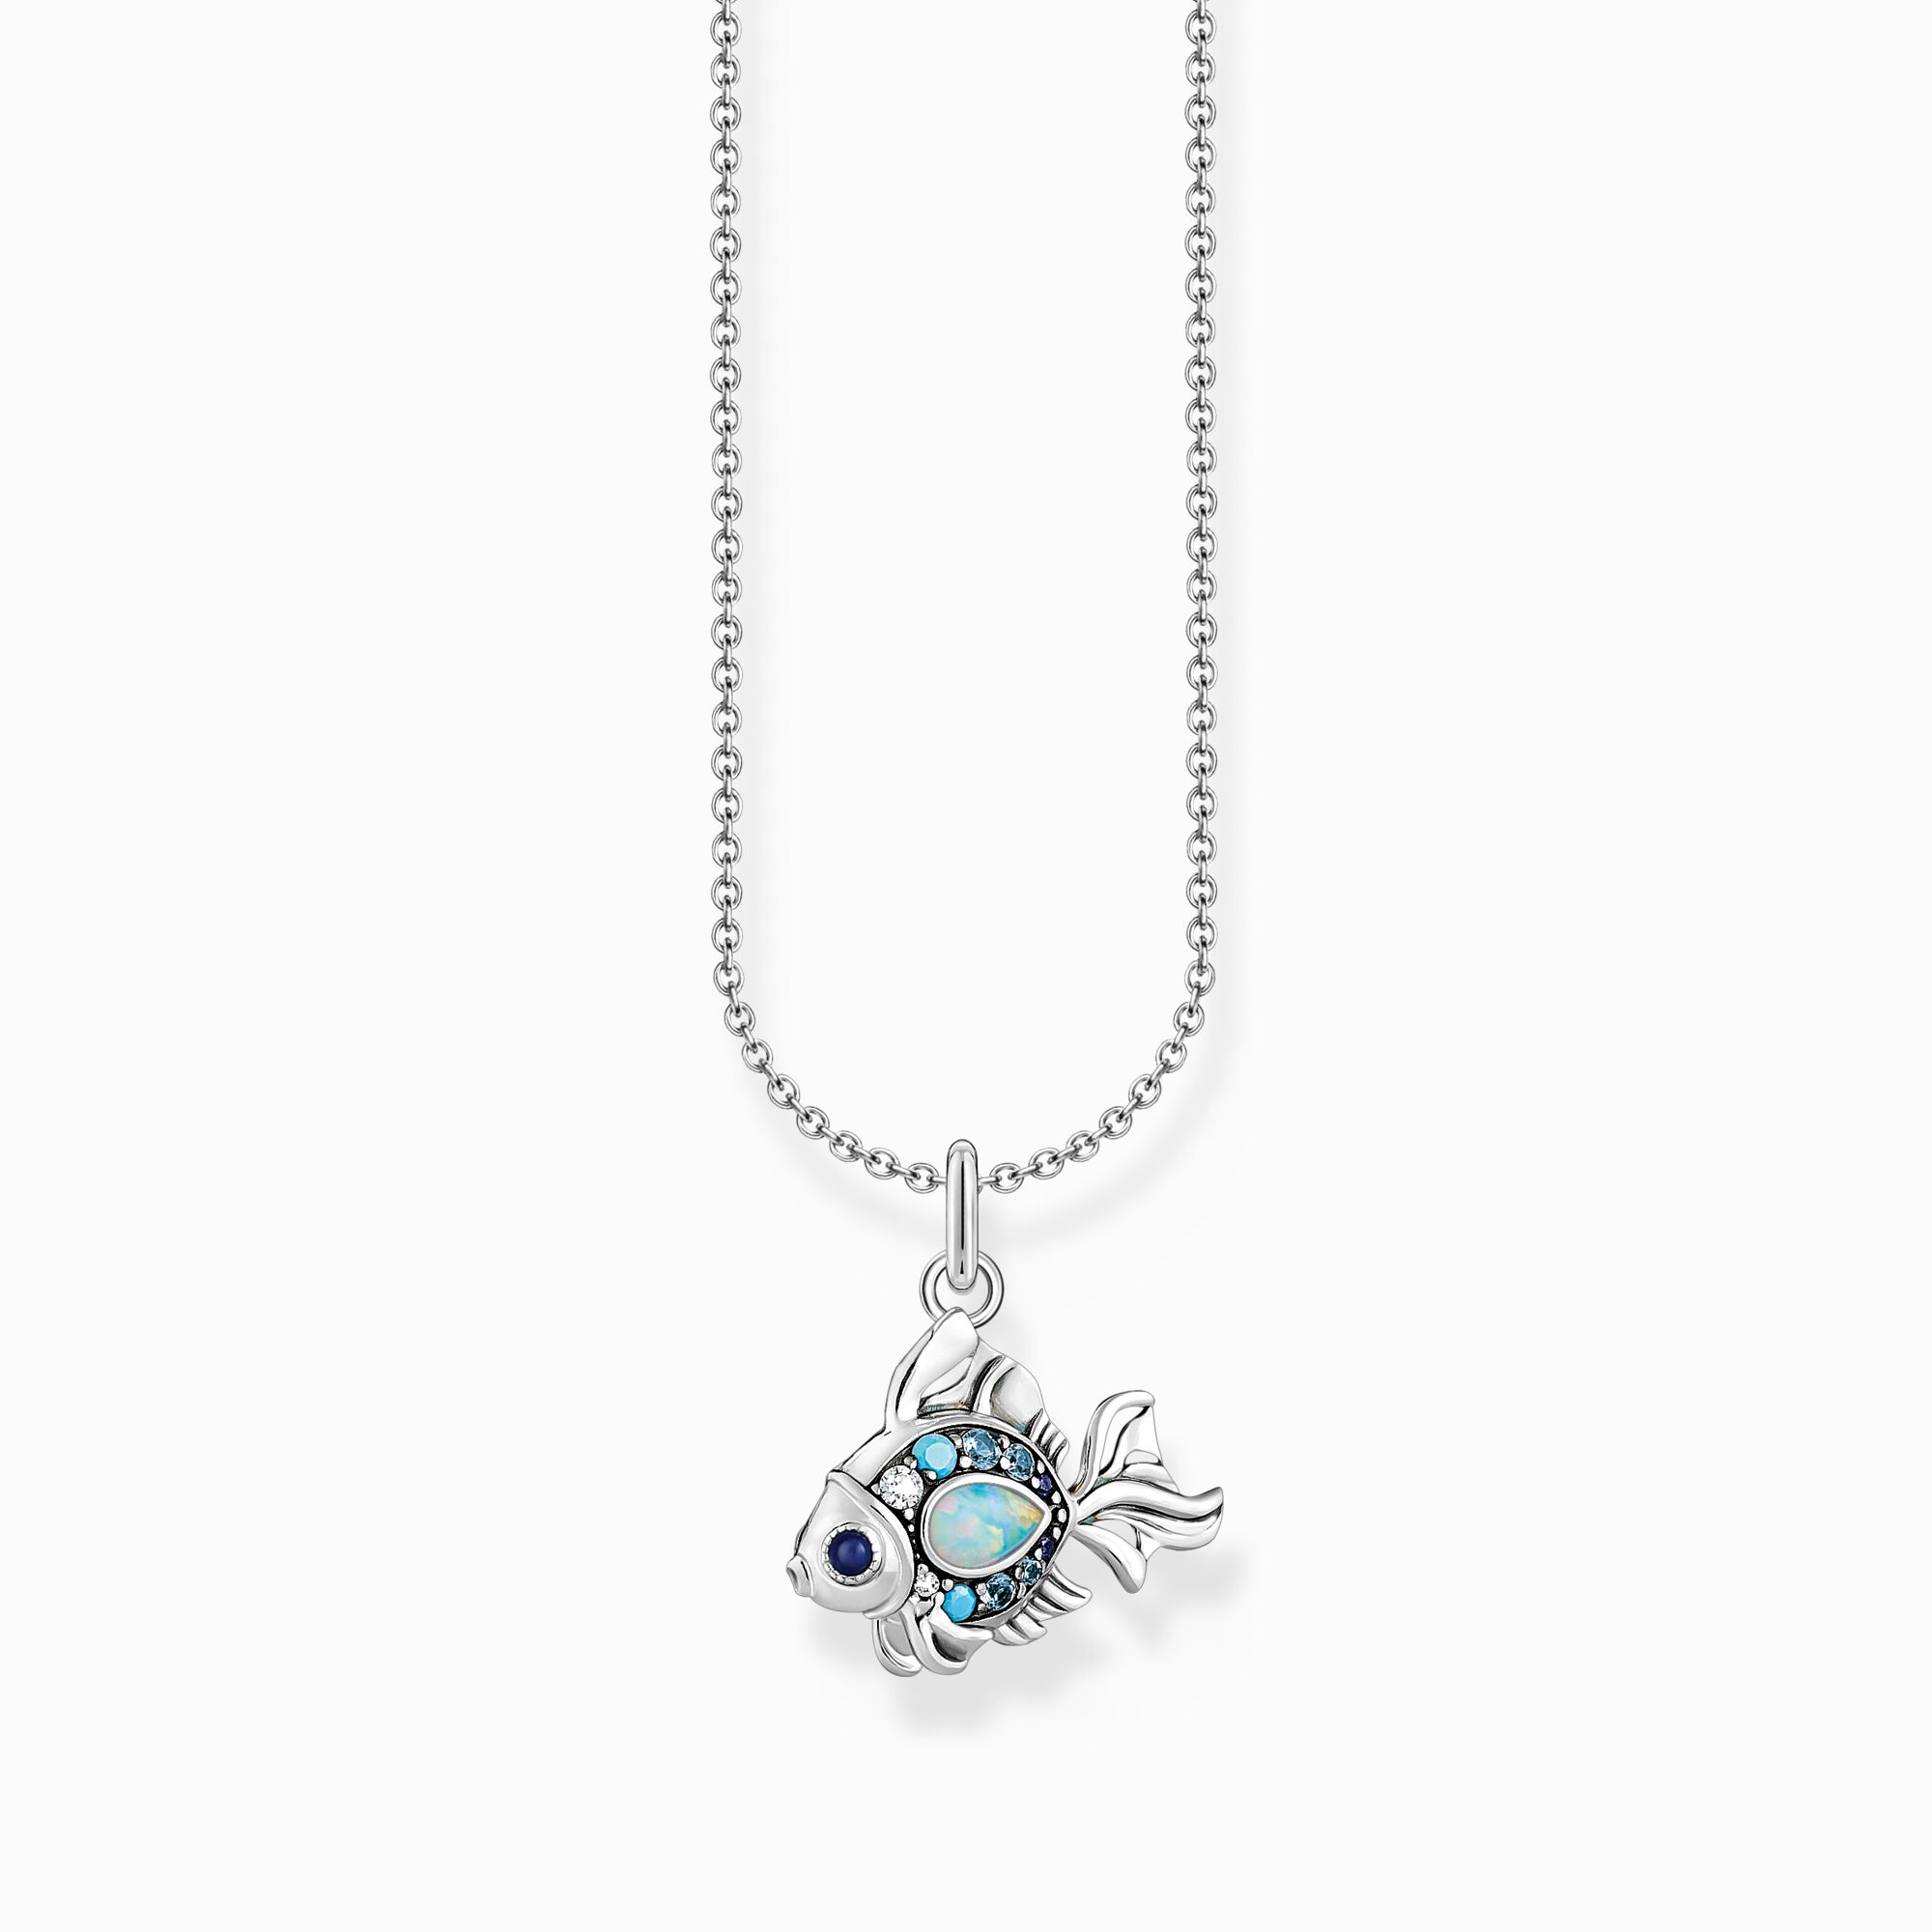 Silver necklace with fish pendant with cold enamel and stones from the Charming Collection collection in the THOMAS SABO online store